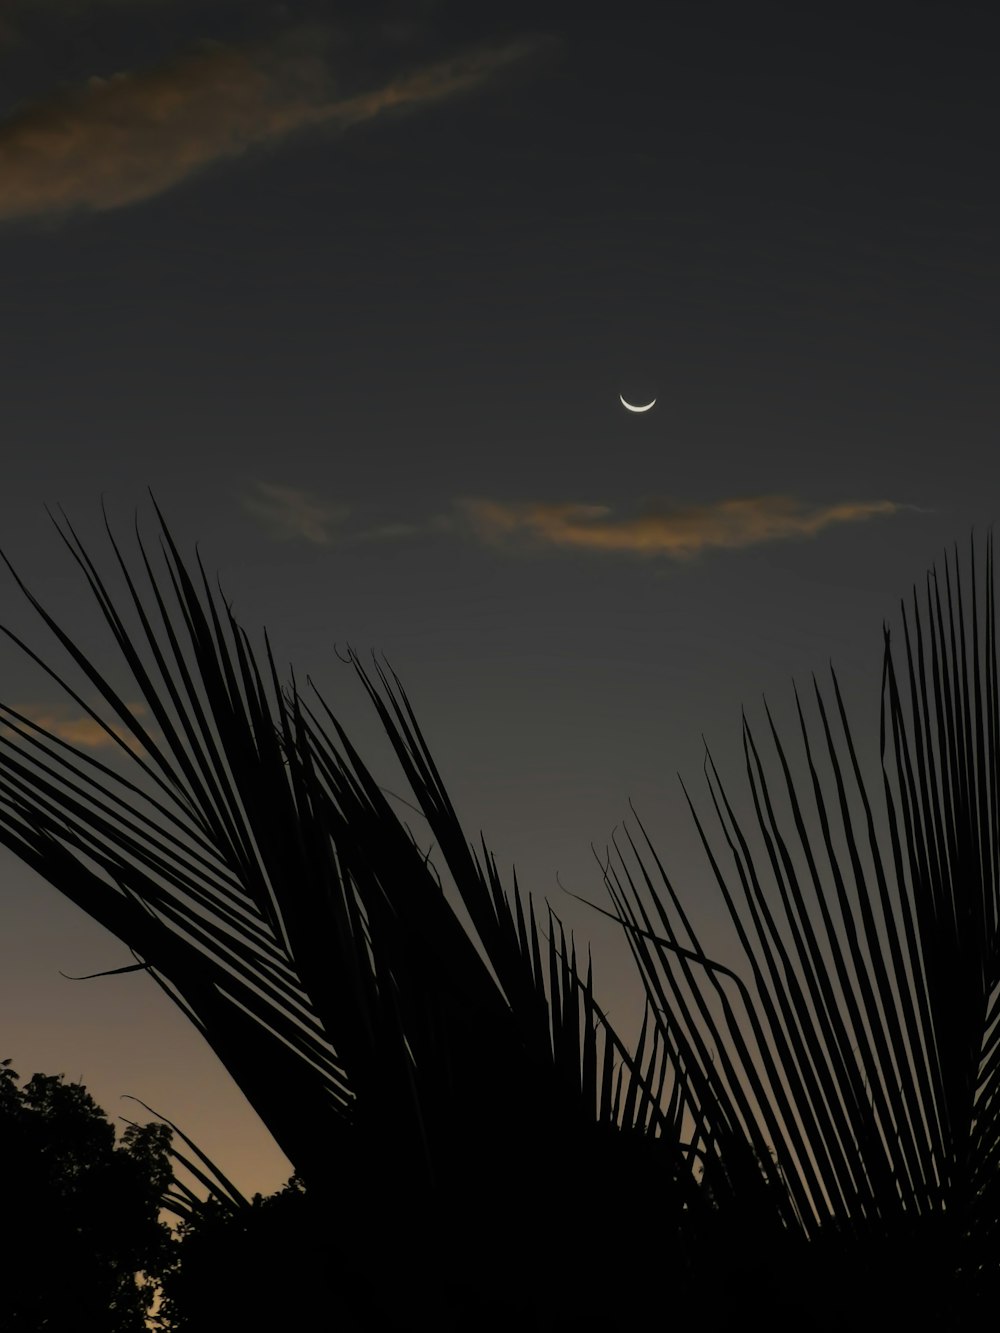 grey crescent moon seen above palm tree